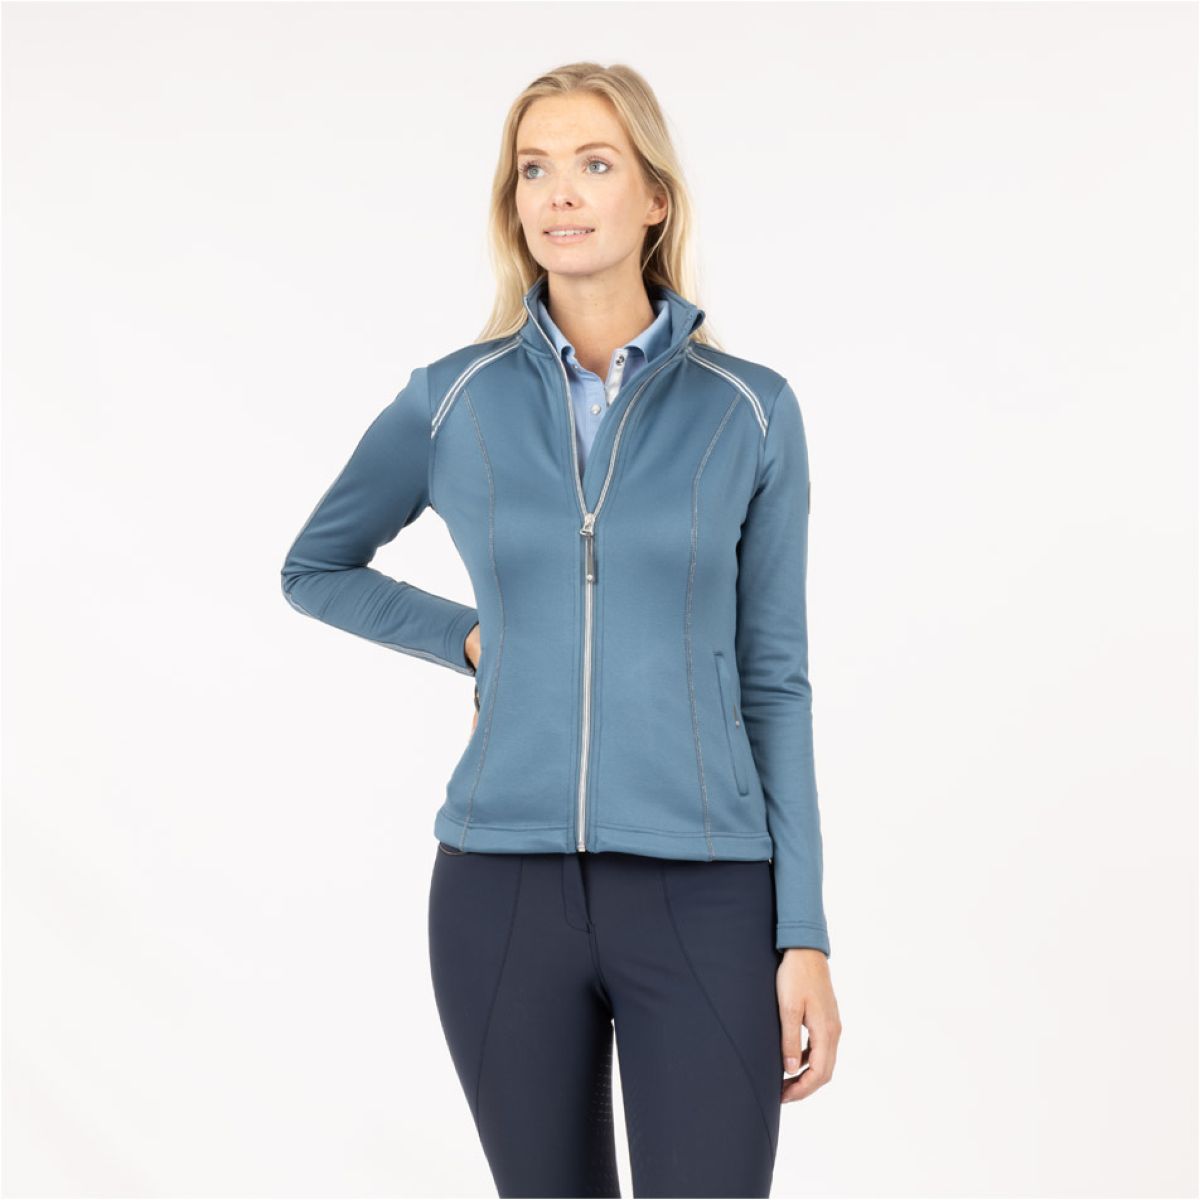 ANKY Jacke Technostretch Taped Ocean View